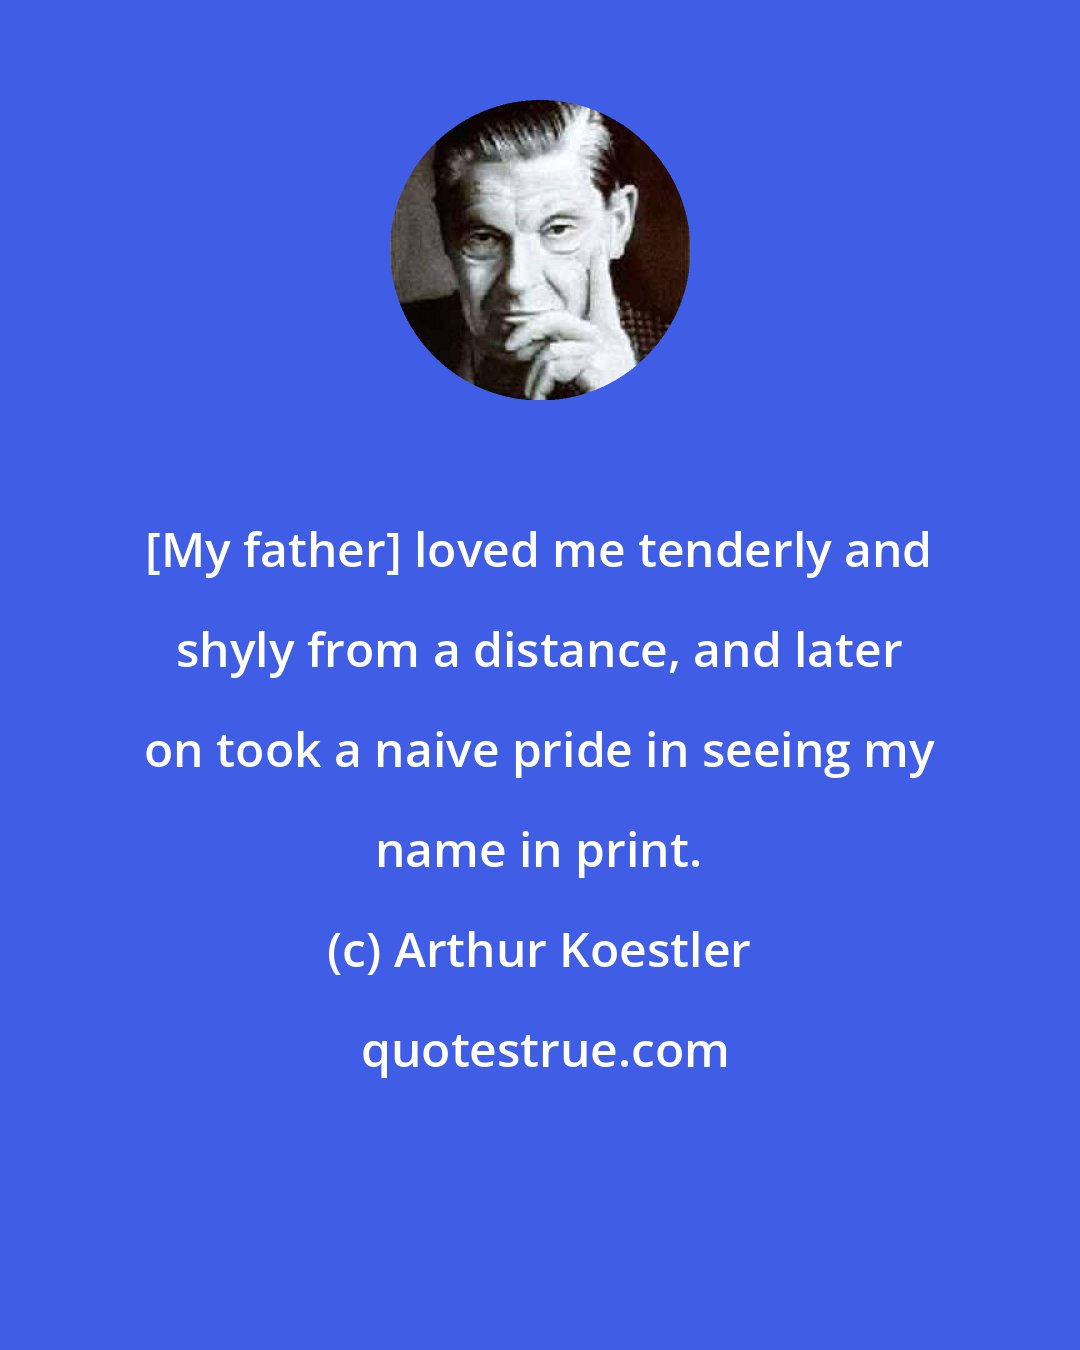 Arthur Koestler: [My father] loved me tenderly and shyly from a distance, and later on took a naive pride in seeing my name in print.